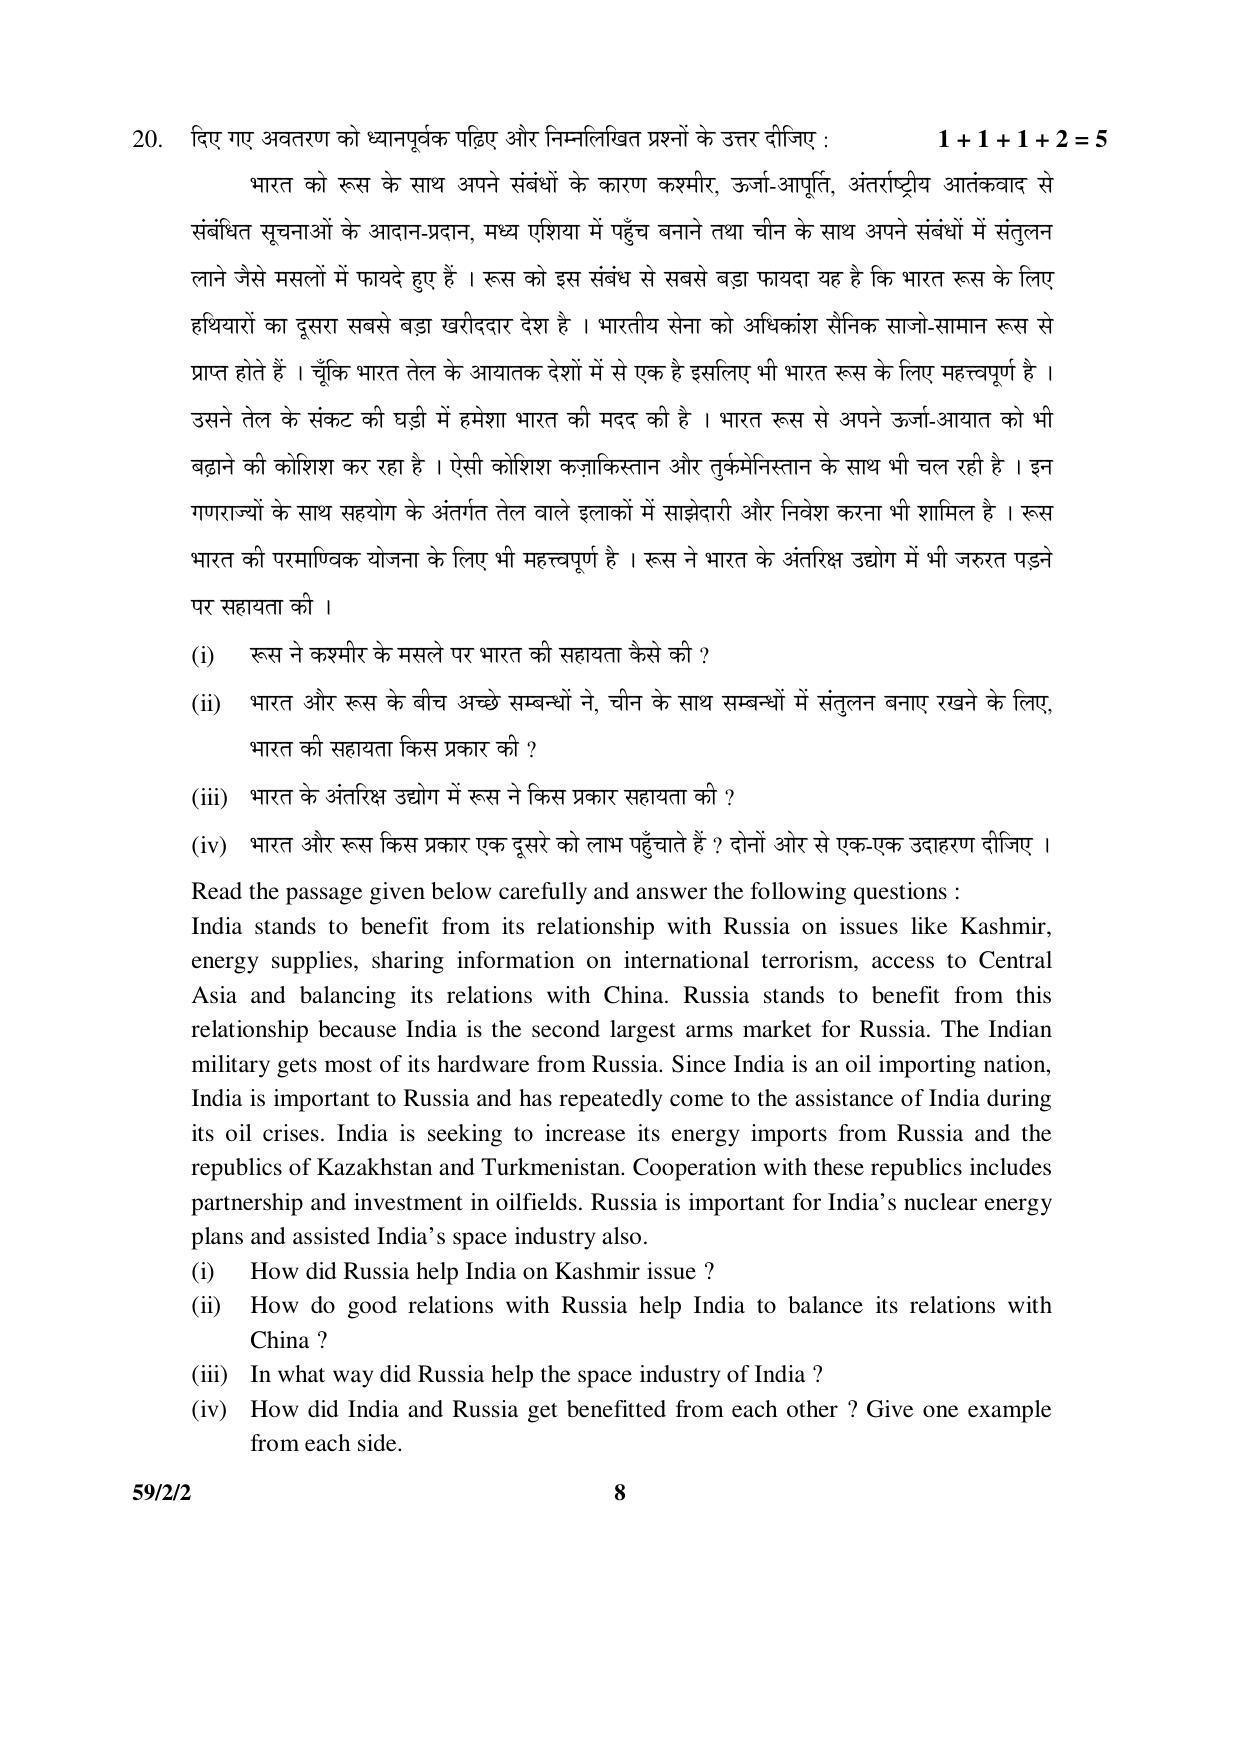 CBSE Class 12 59-2-2 _Political Science 2016 Question Paper - Page 8